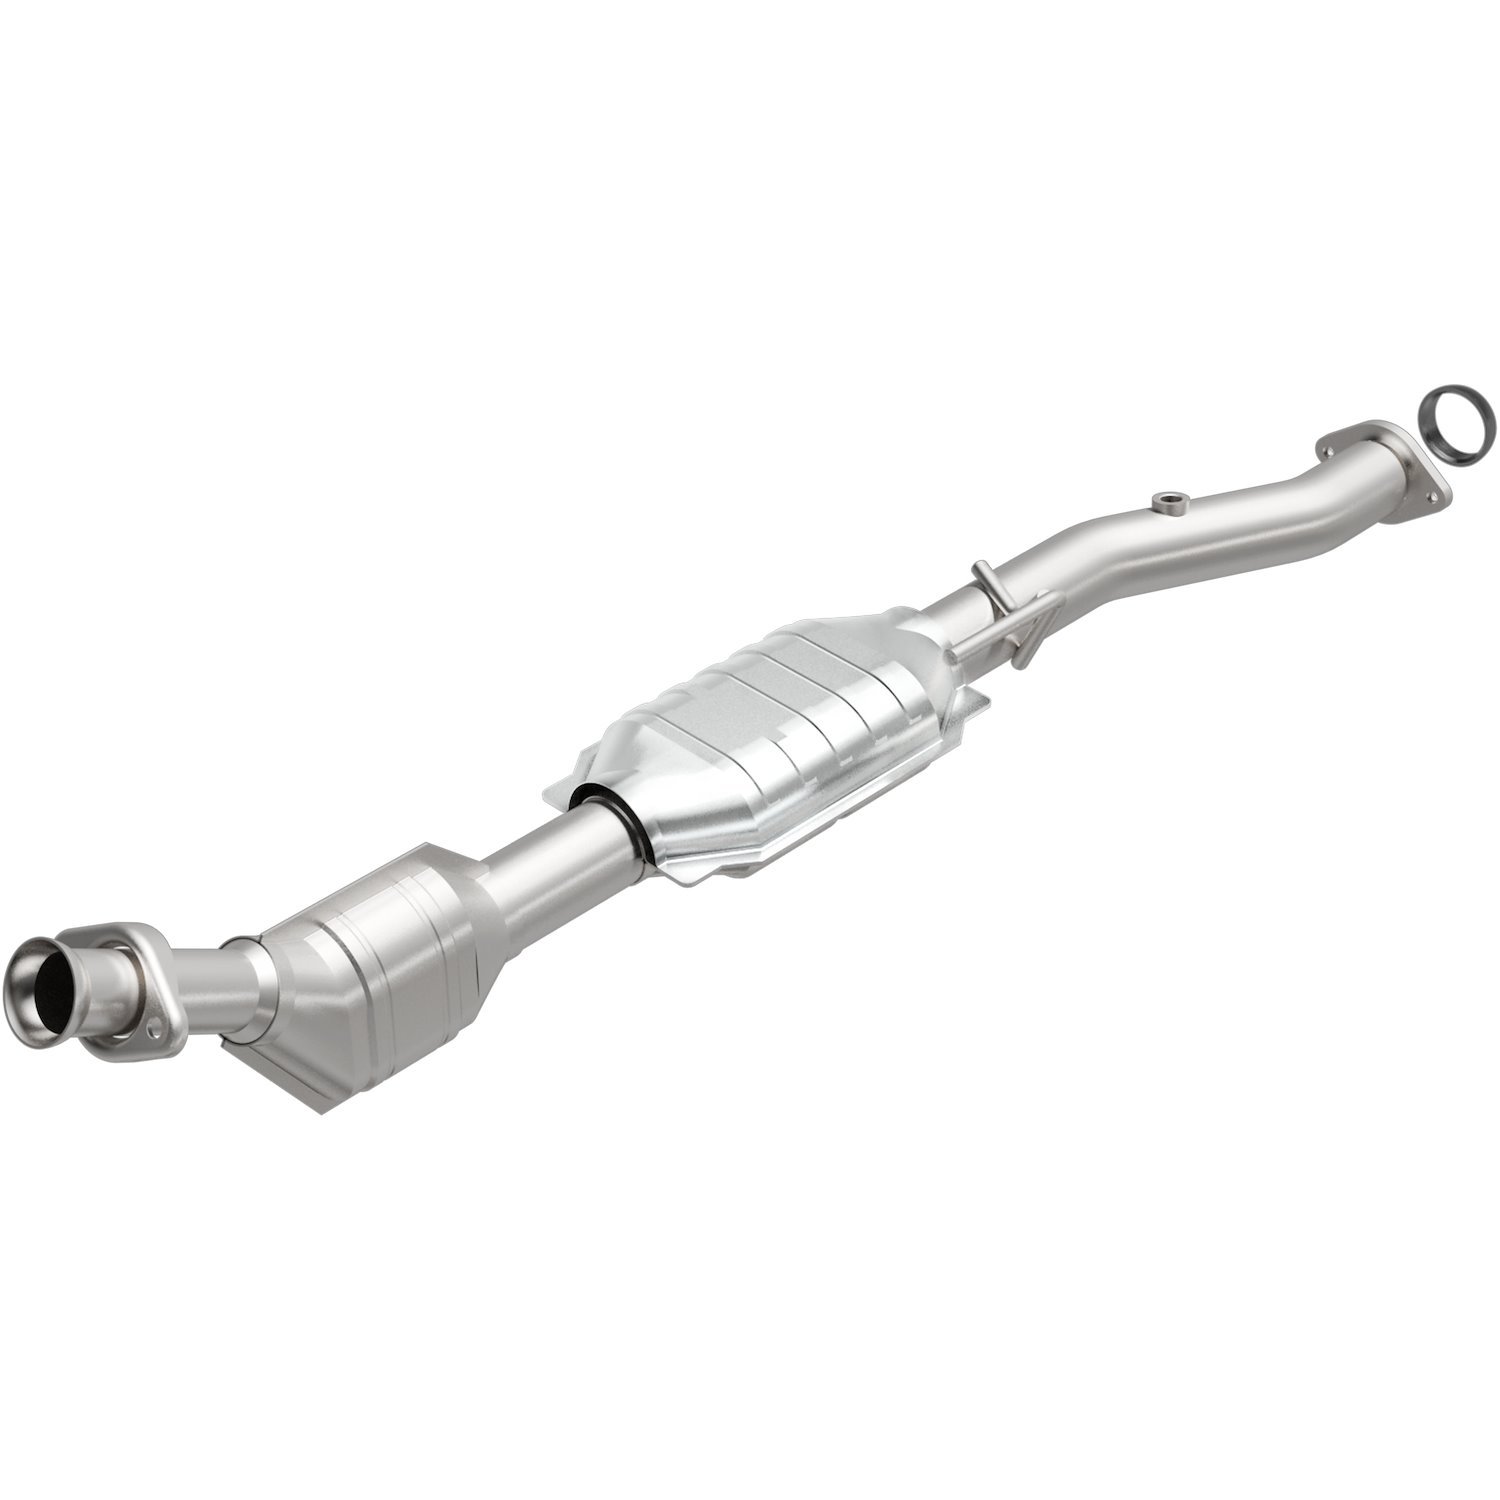 California Grade CARB Compliant Direct-Fit Catalytic Converter 441117